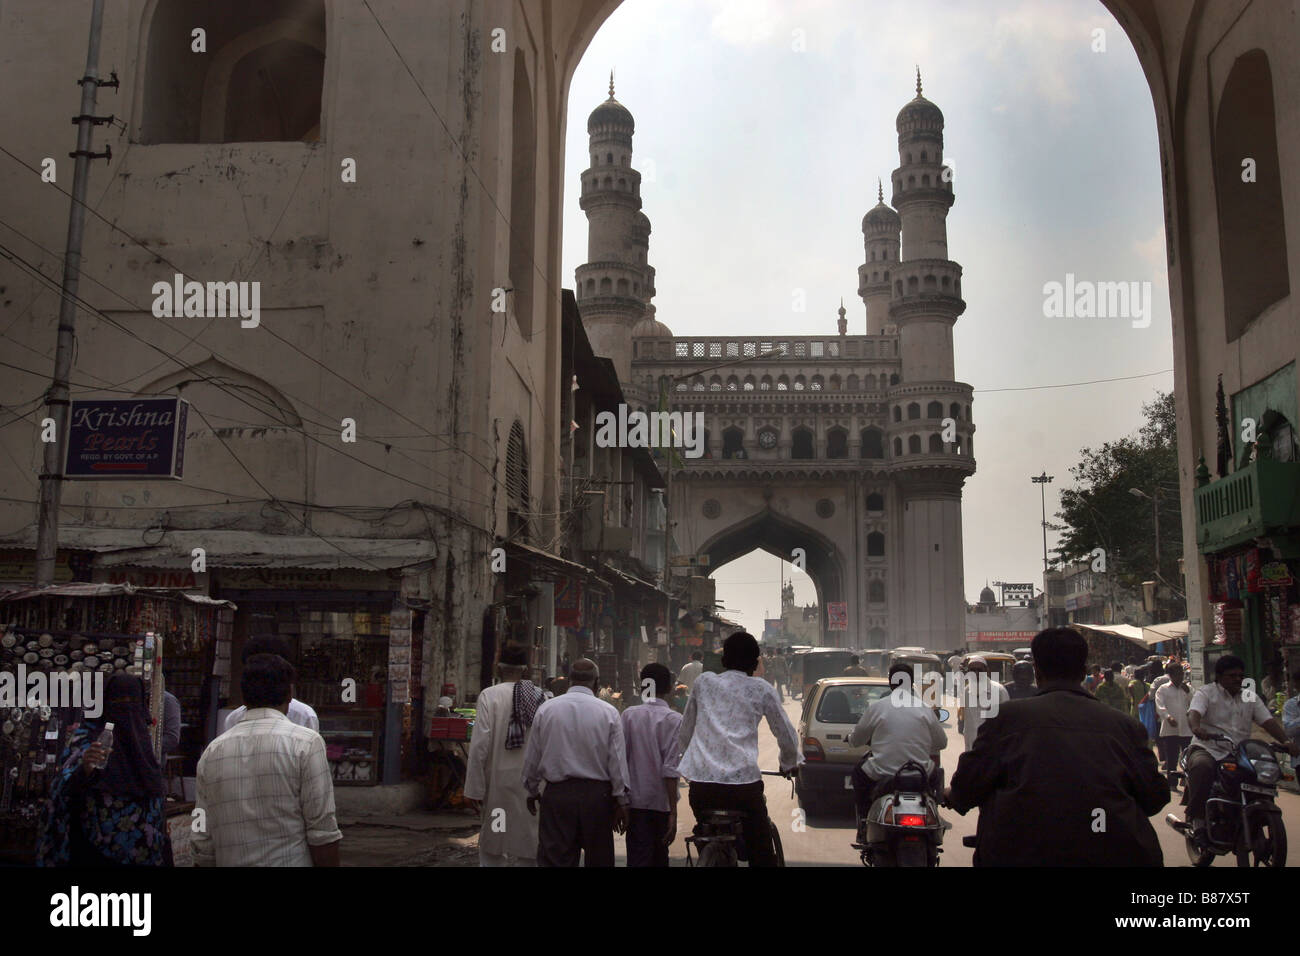 The Char minar mosque in Hyderabad in India Stock Photo